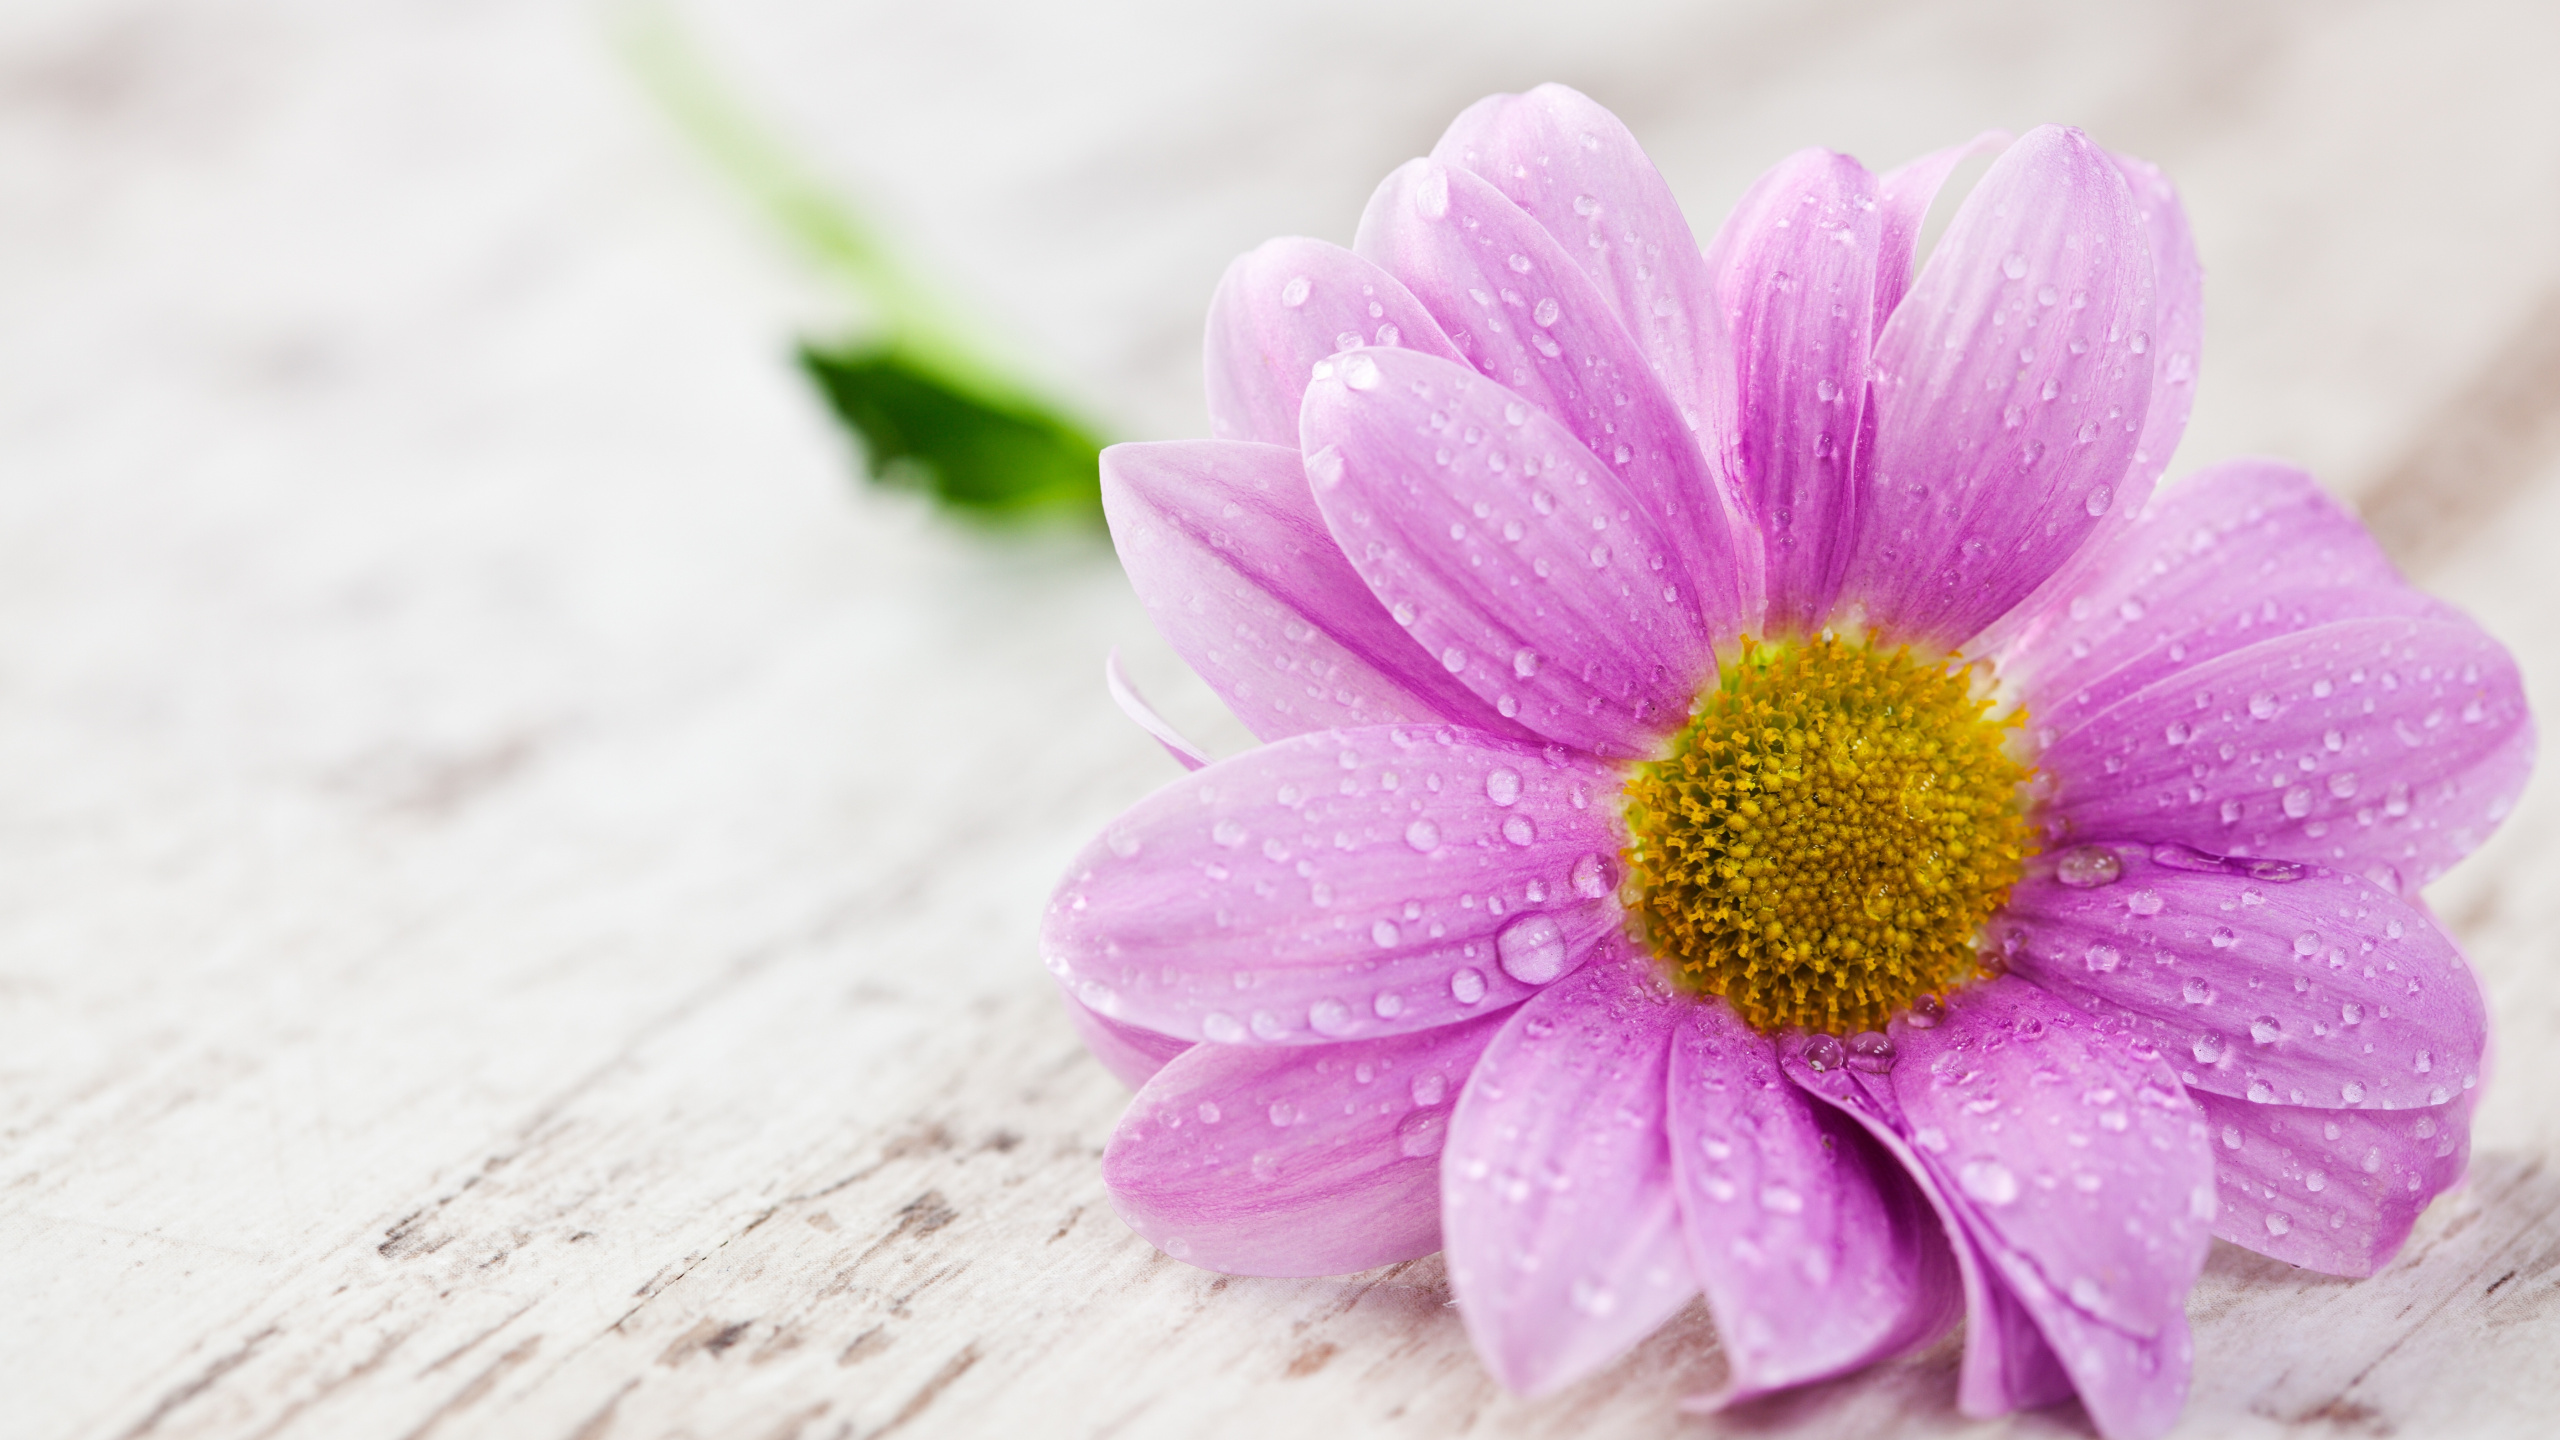 Pink Flower on White Surface. Wallpaper in 2560x1440 Resolution